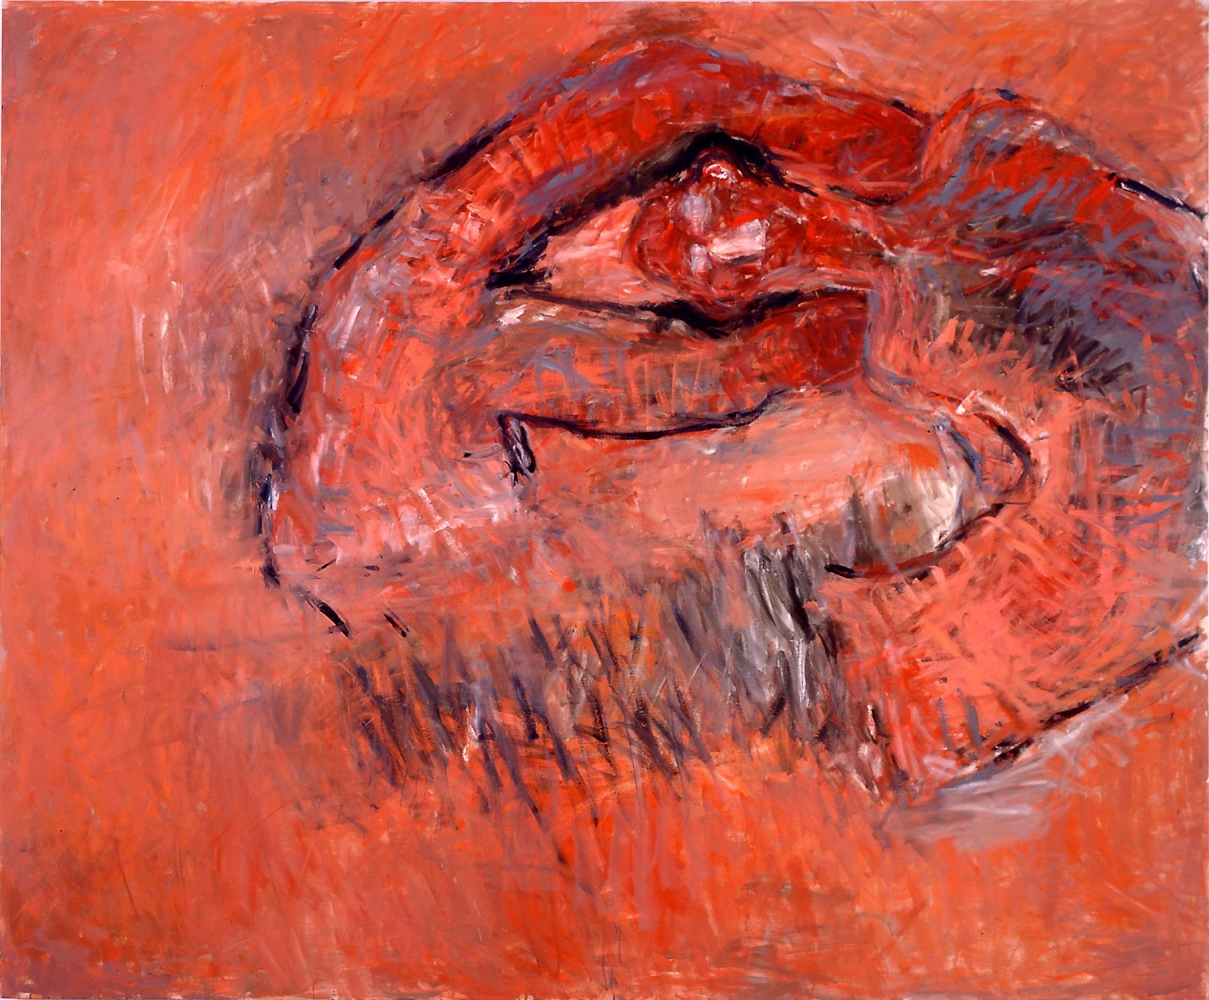 red-orange painting of an abstracted human figure contorted into a donut shape